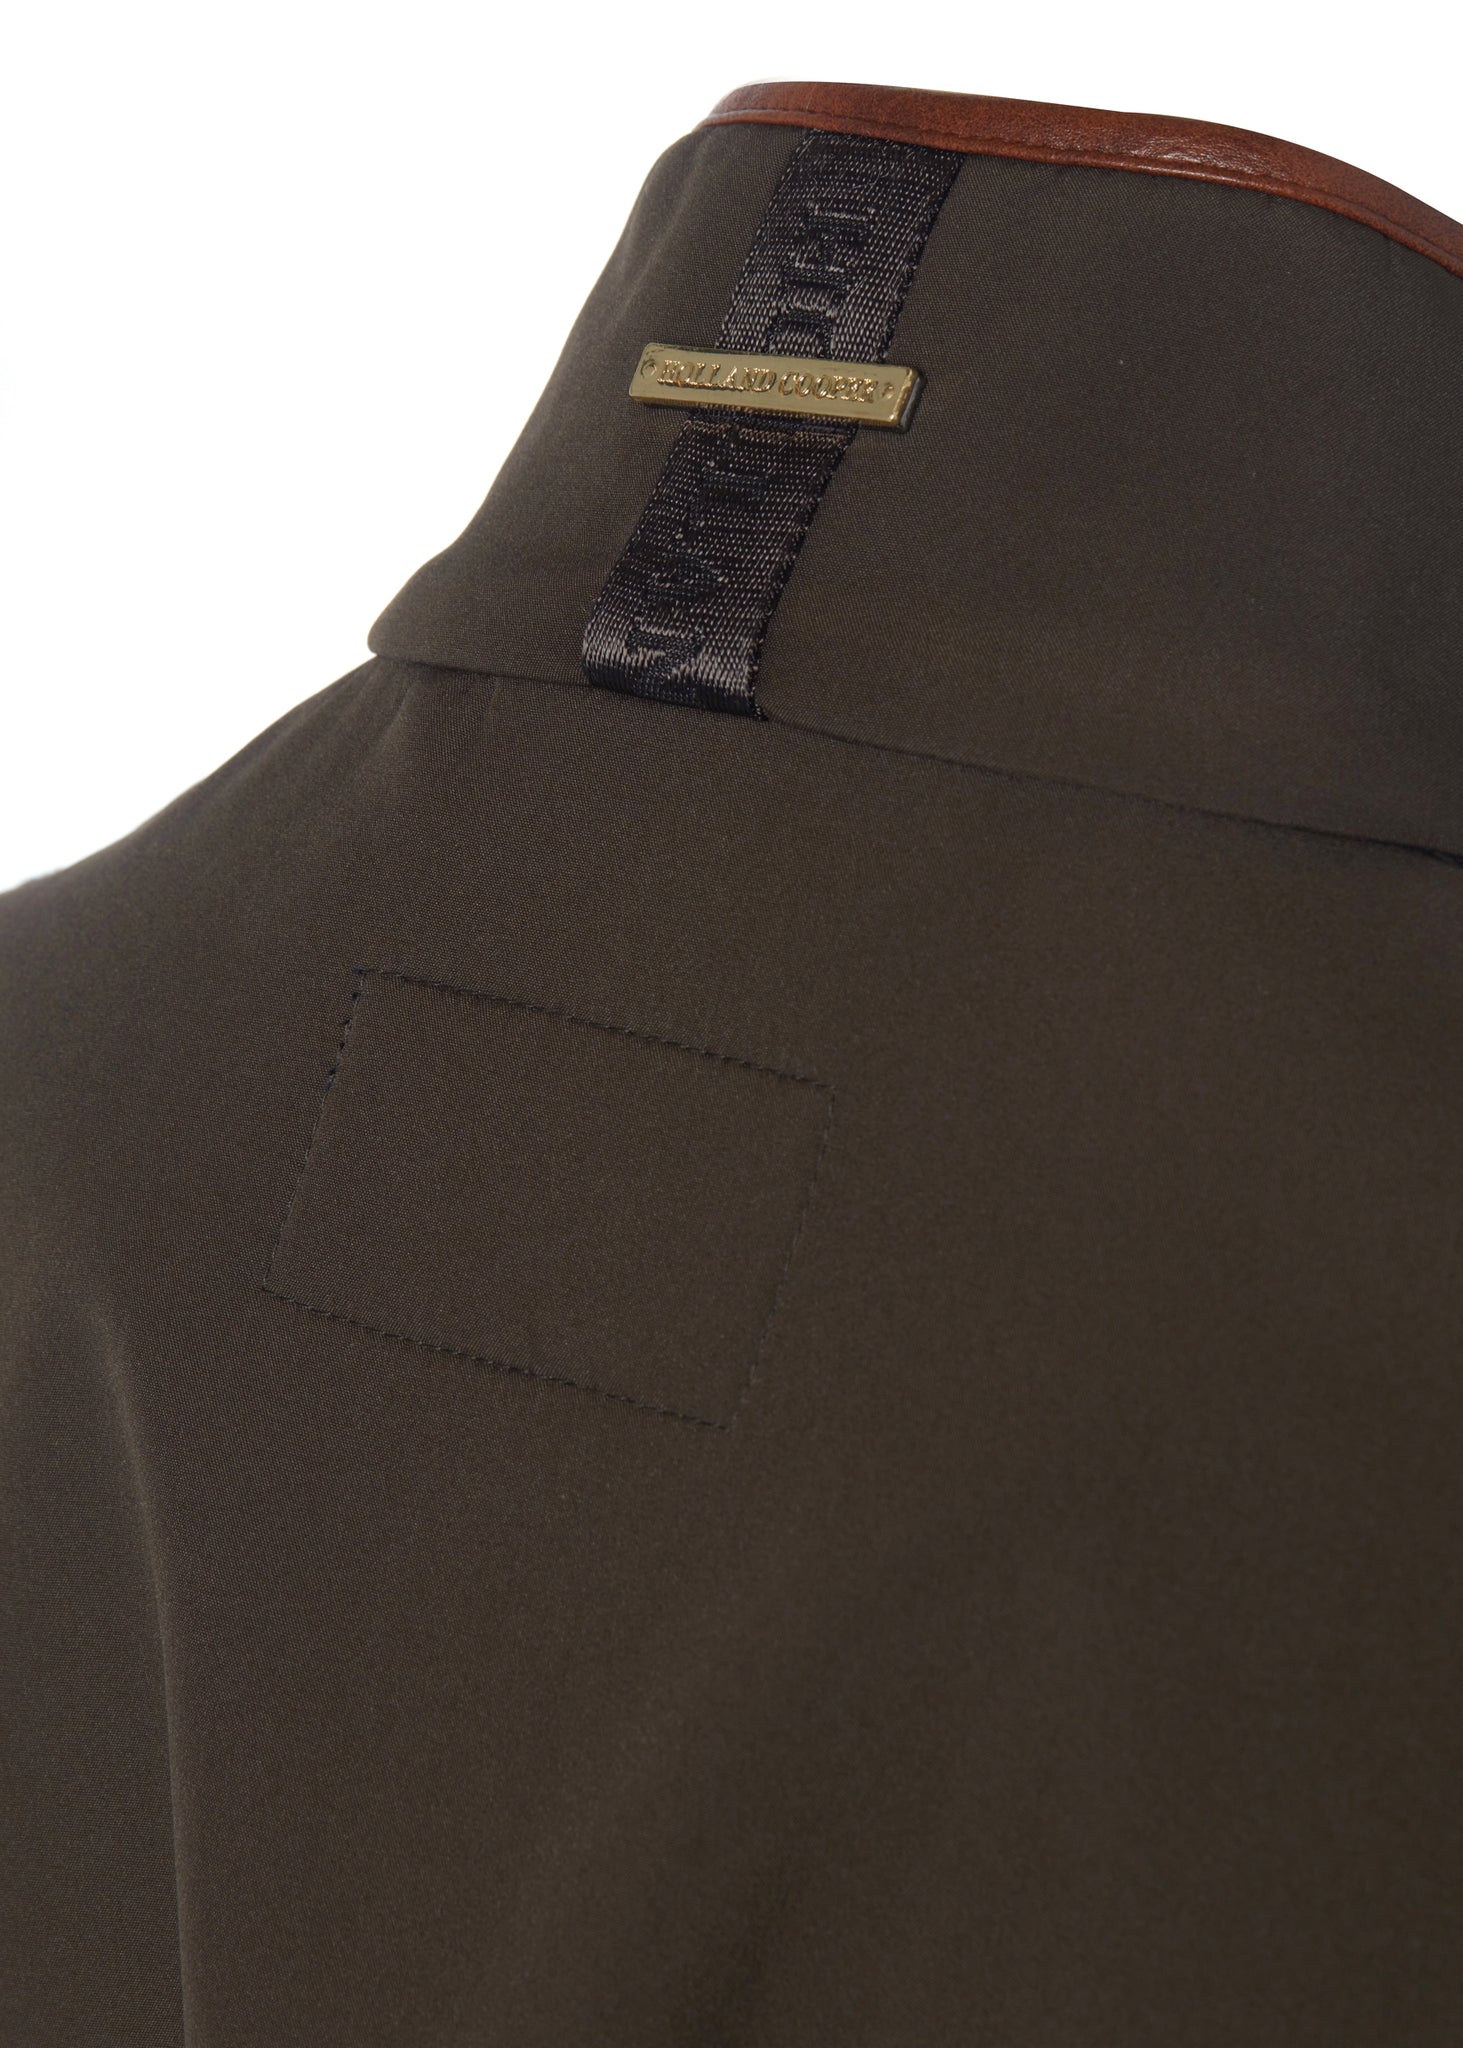 detail shot of the logo on the back of the collar on the womens khaki gilet with dark brown leather seams